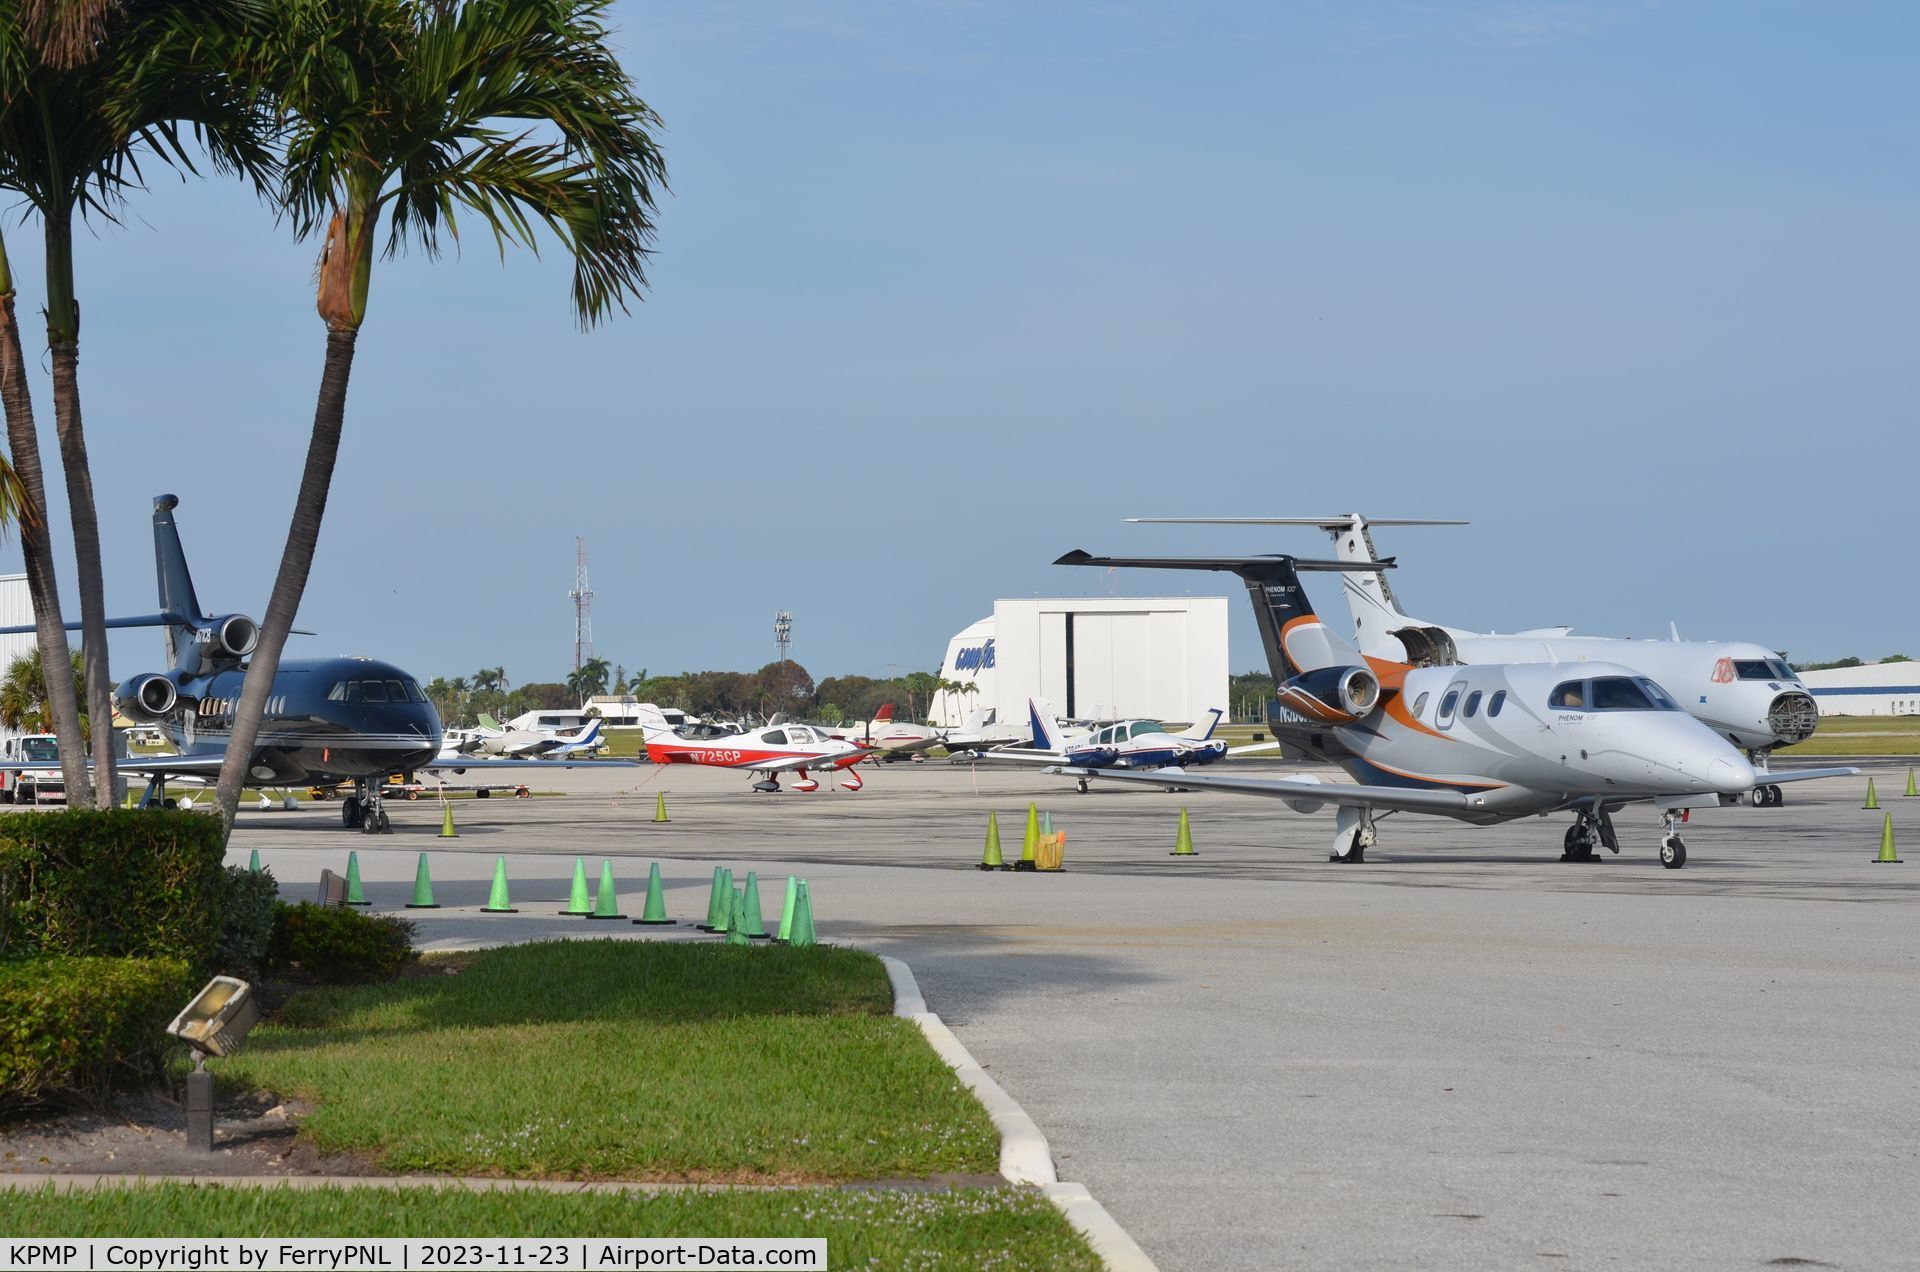 Pompano Beach Airpark Airport (PMP) - Pompano apron seen from the parking lot next to the terminal